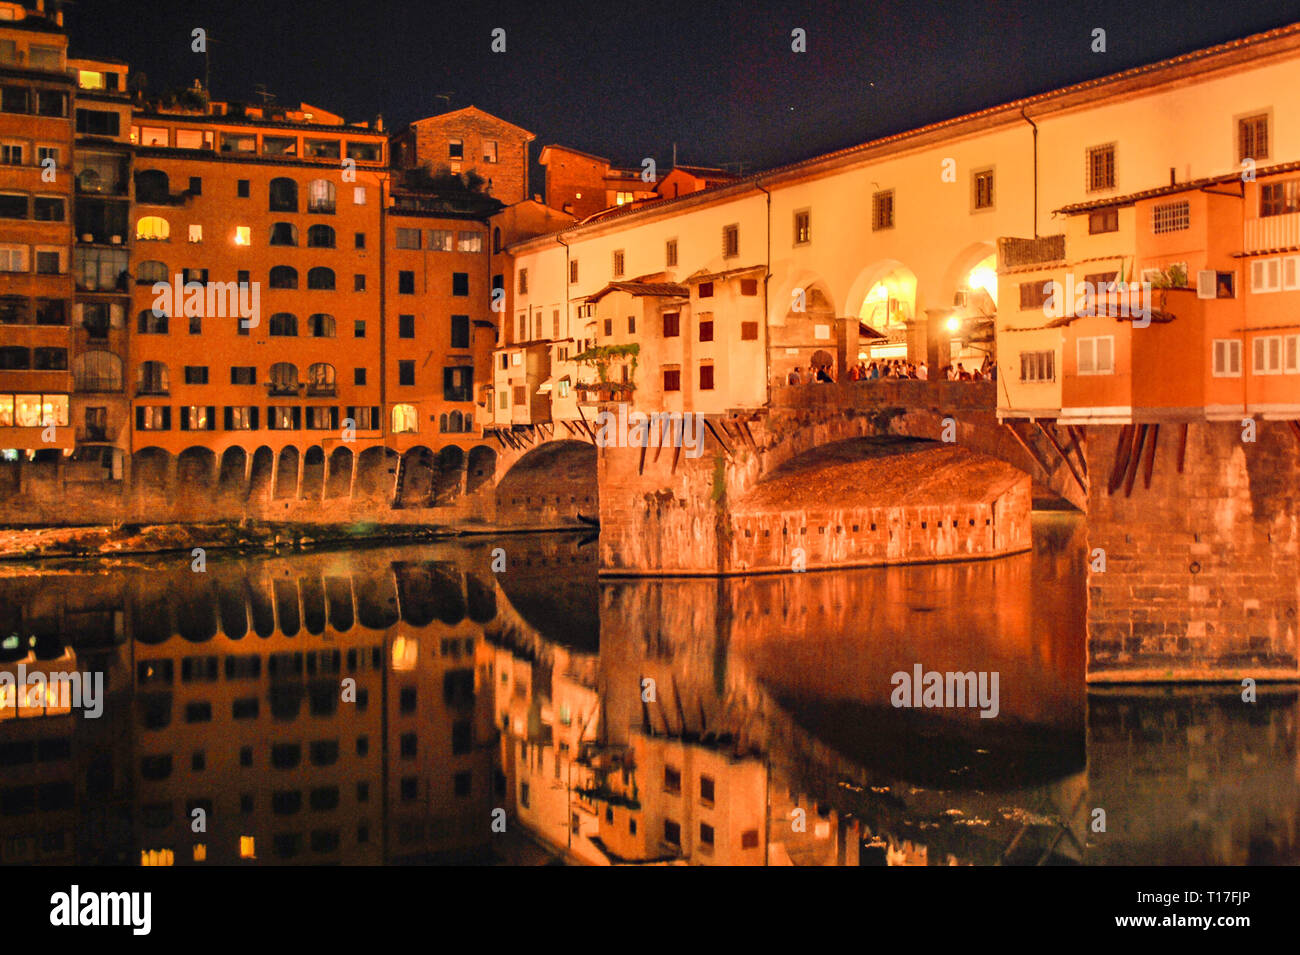 River Arno and famous bridge Ponte Vecchio at sunset from Ponte alle Grazie in Florence, Tuscany, Italy Stock Photo